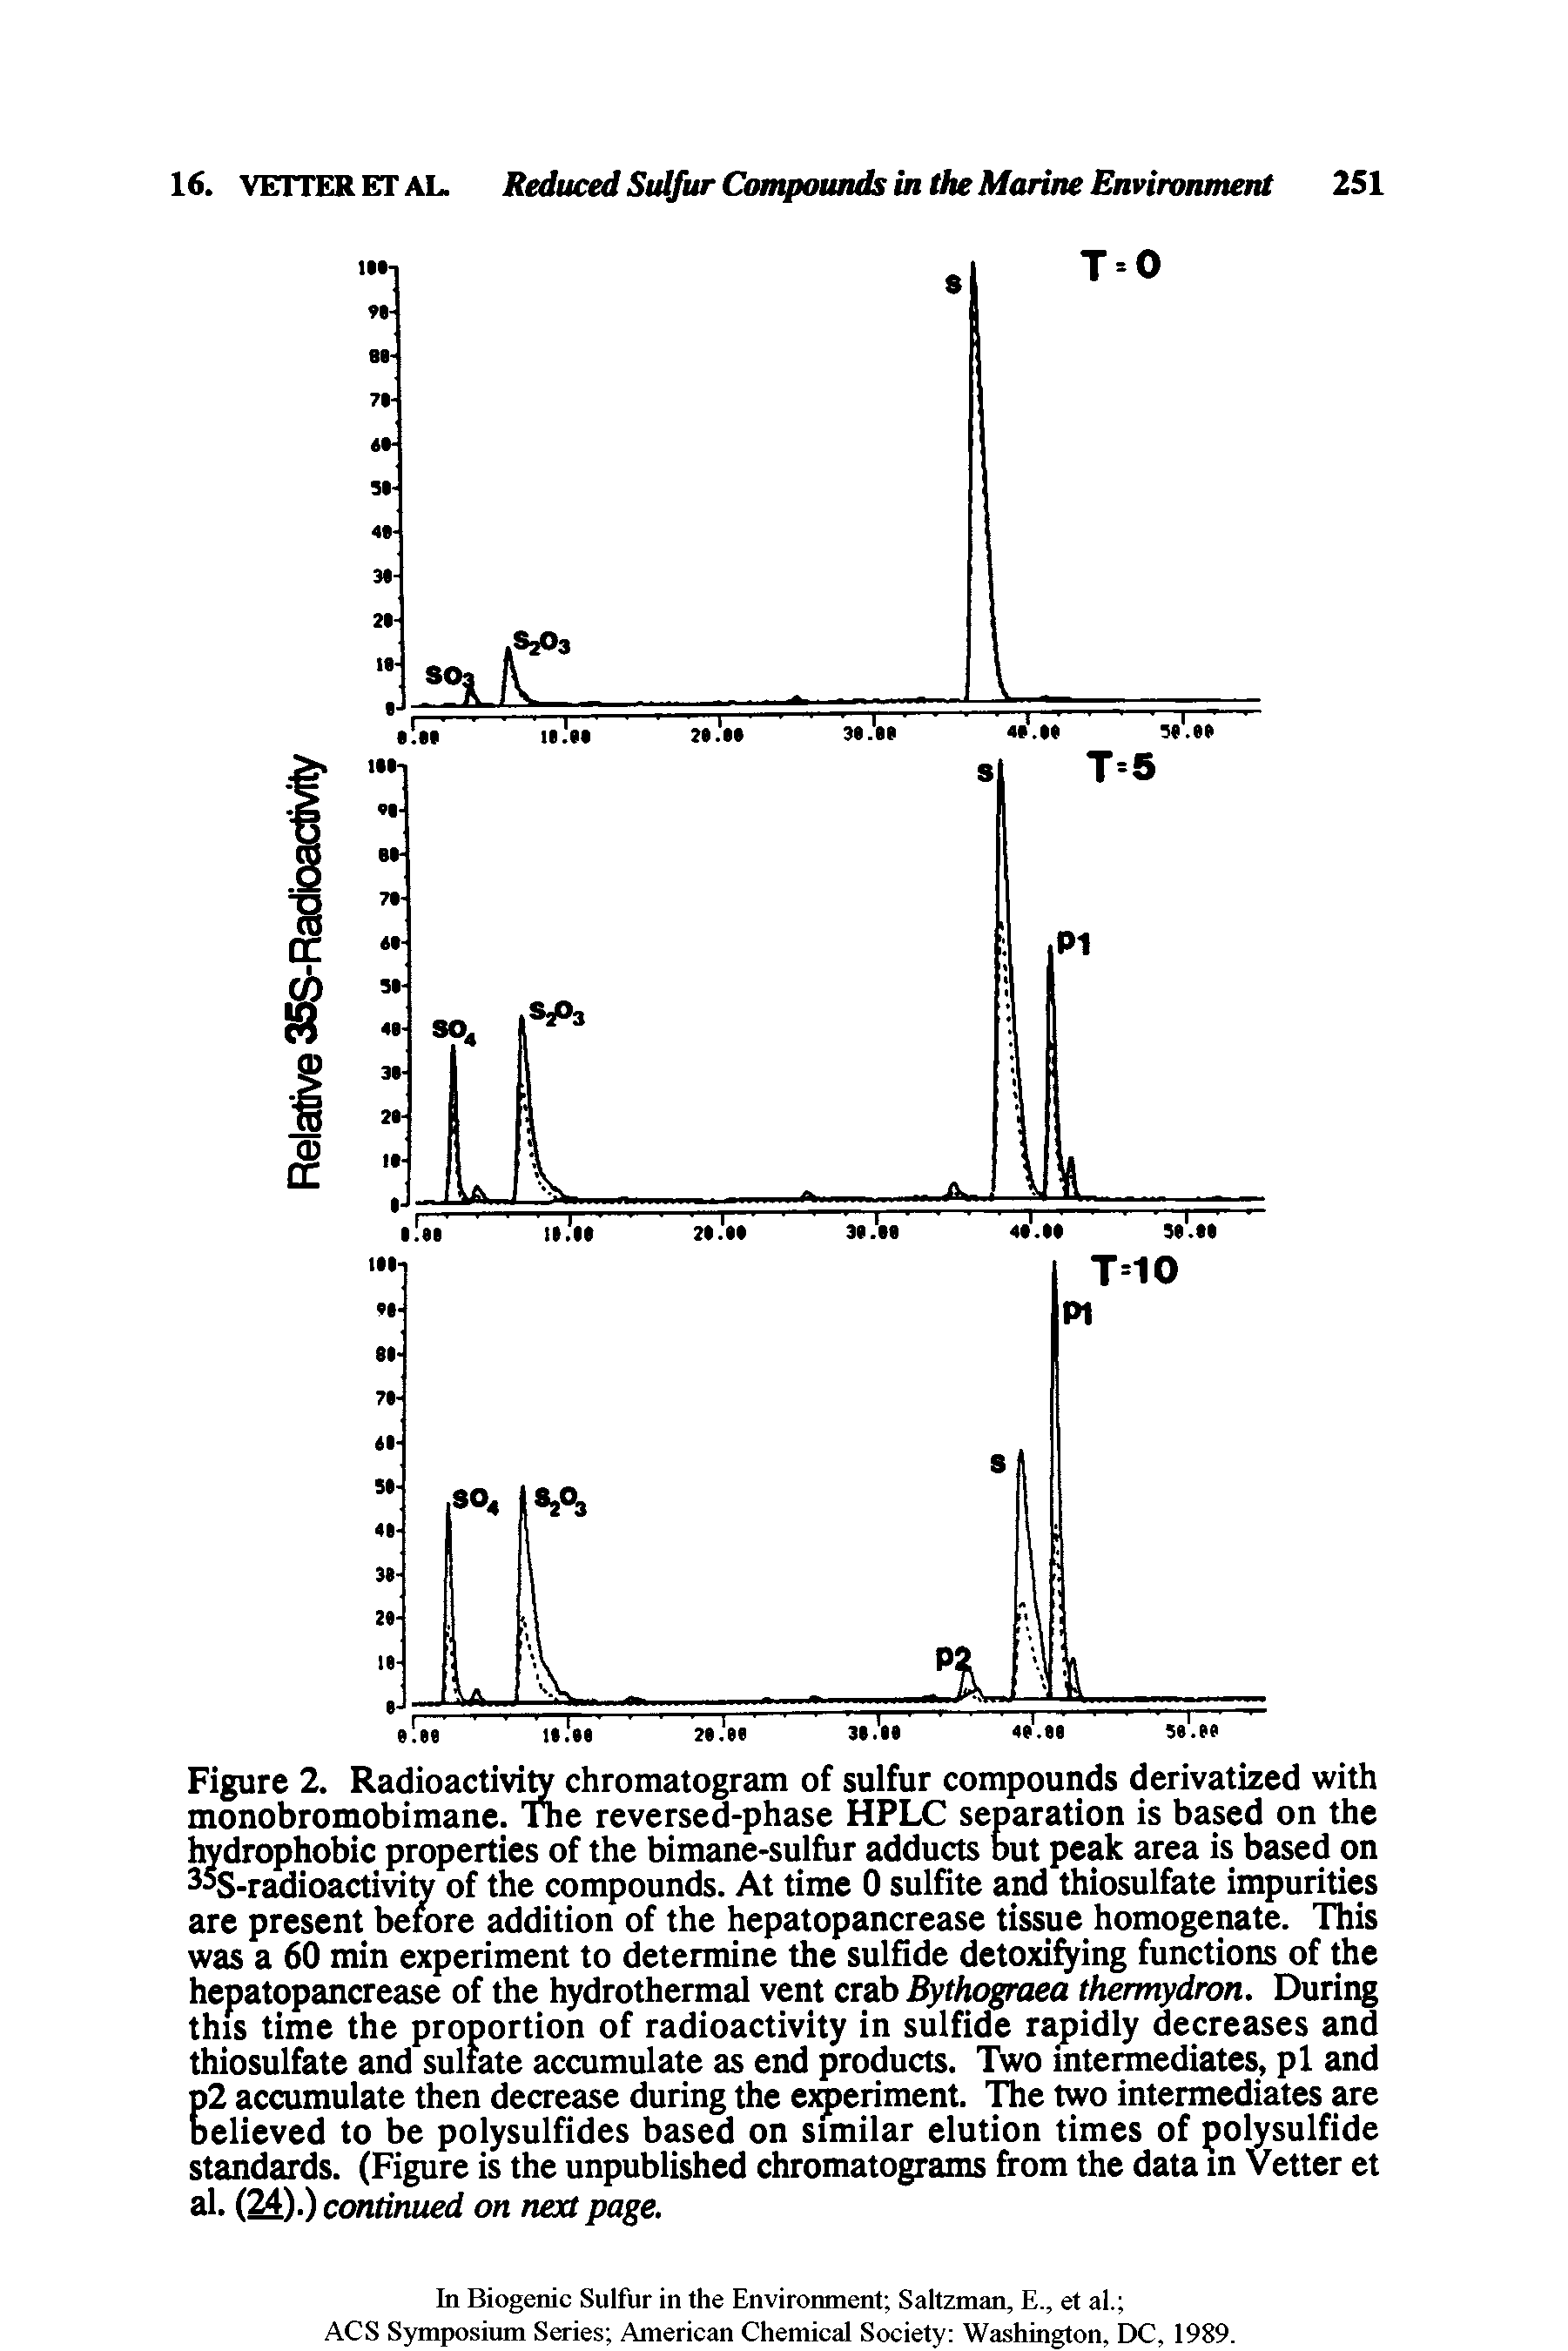 Figure 2. Radioactivity chromatogram of sulfur compounds derivatized with monobromobimane. The reversed-phase HPLC separation is based on the hydrophobic properties of the bimane-sulfur adducts but peak area is based on "S-radioactivity of the compounds. At time 0 sulfite and thiosulfate impurities are present before addition of the hepatopancrease tissue homogenate. This was a 60 min experiment to determine the sulfide detoxifying functions of the hepatopancrease of the hydrothermal vent crab Bythograea thermydron. During this time the proportion of radioactivity in sulfide rapidly decreases and thiosulfate and sulfate accumulate as end products. Two intermediates, pi and p2 accumulate then decrease during the experiment. The two intermediates are believed to be polysulfides based on similar elution times of polysulfide standards. (Figure is the unpublished chromatograms from the data in Vetter et al. (24)-) continued on next page.